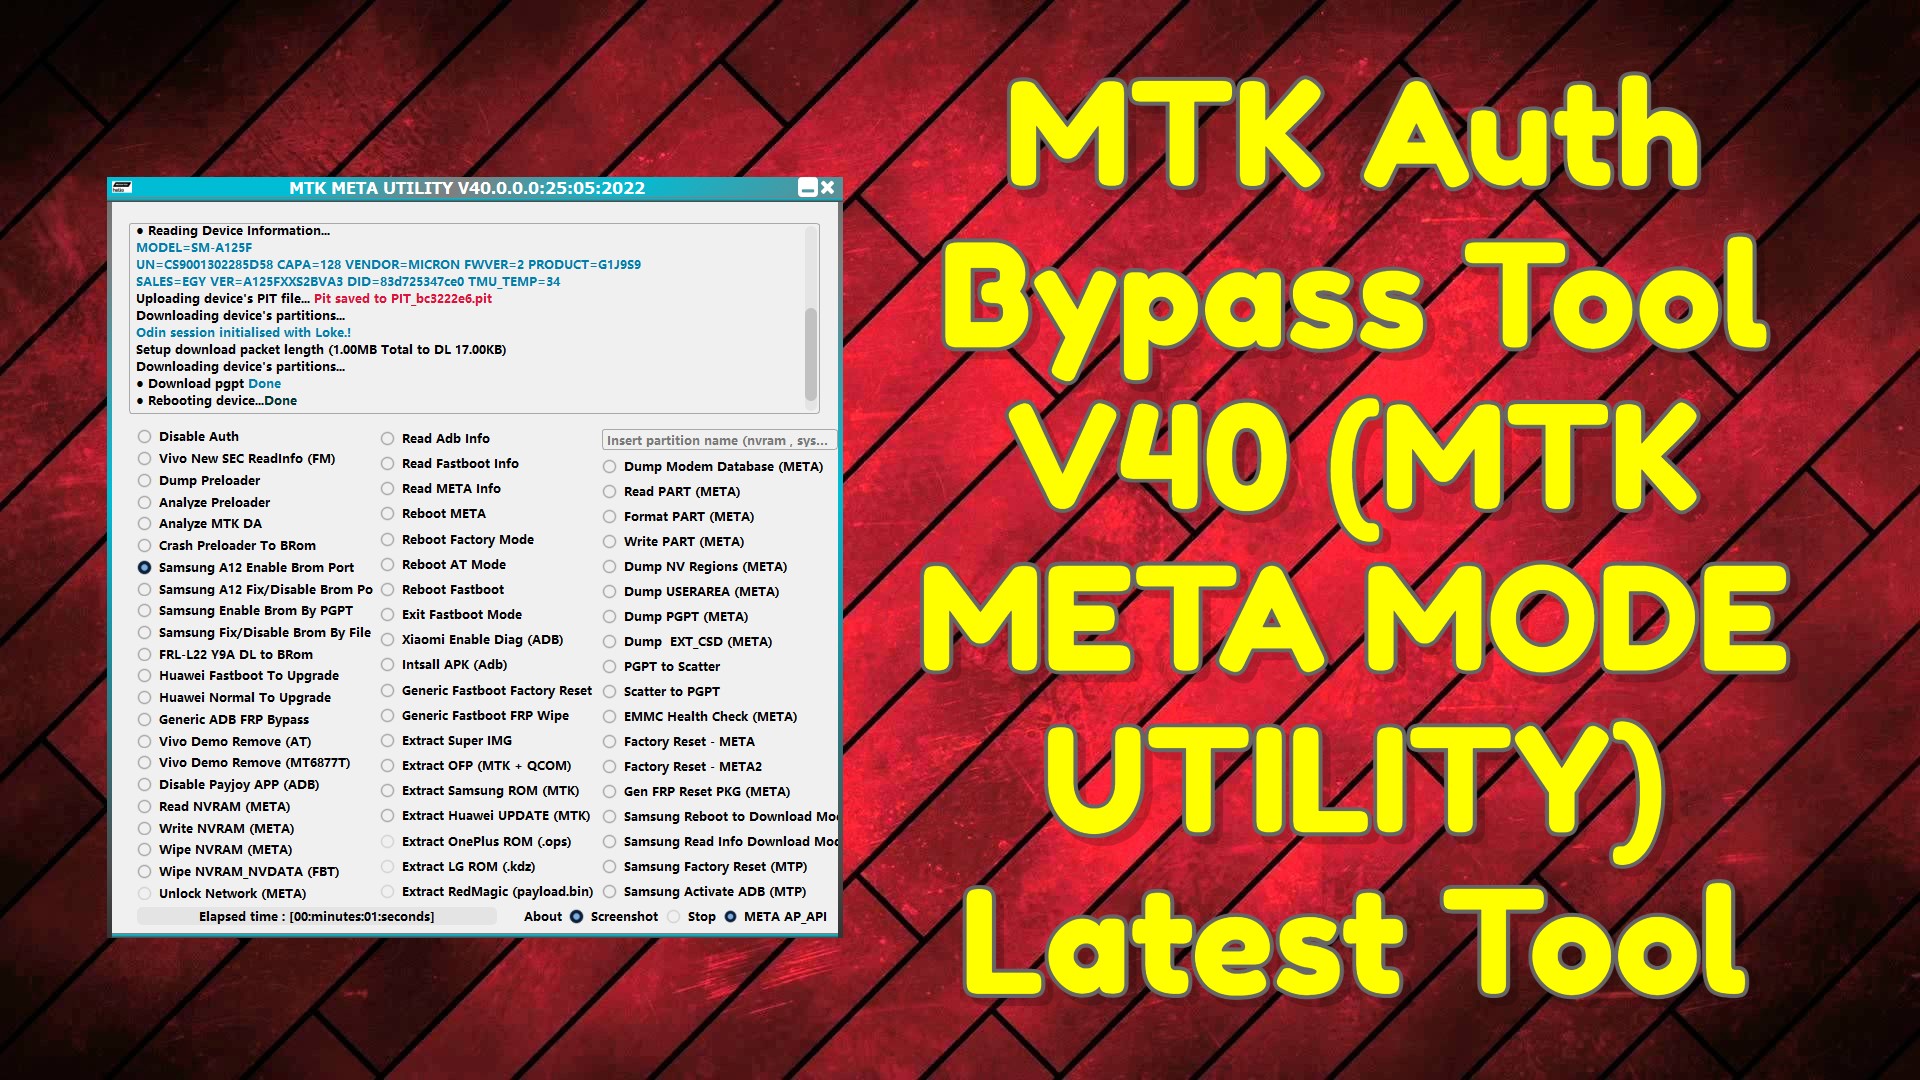 MTK Auth Bypass Tool V40 (MTK META MODE UTILITY) Latest Tool